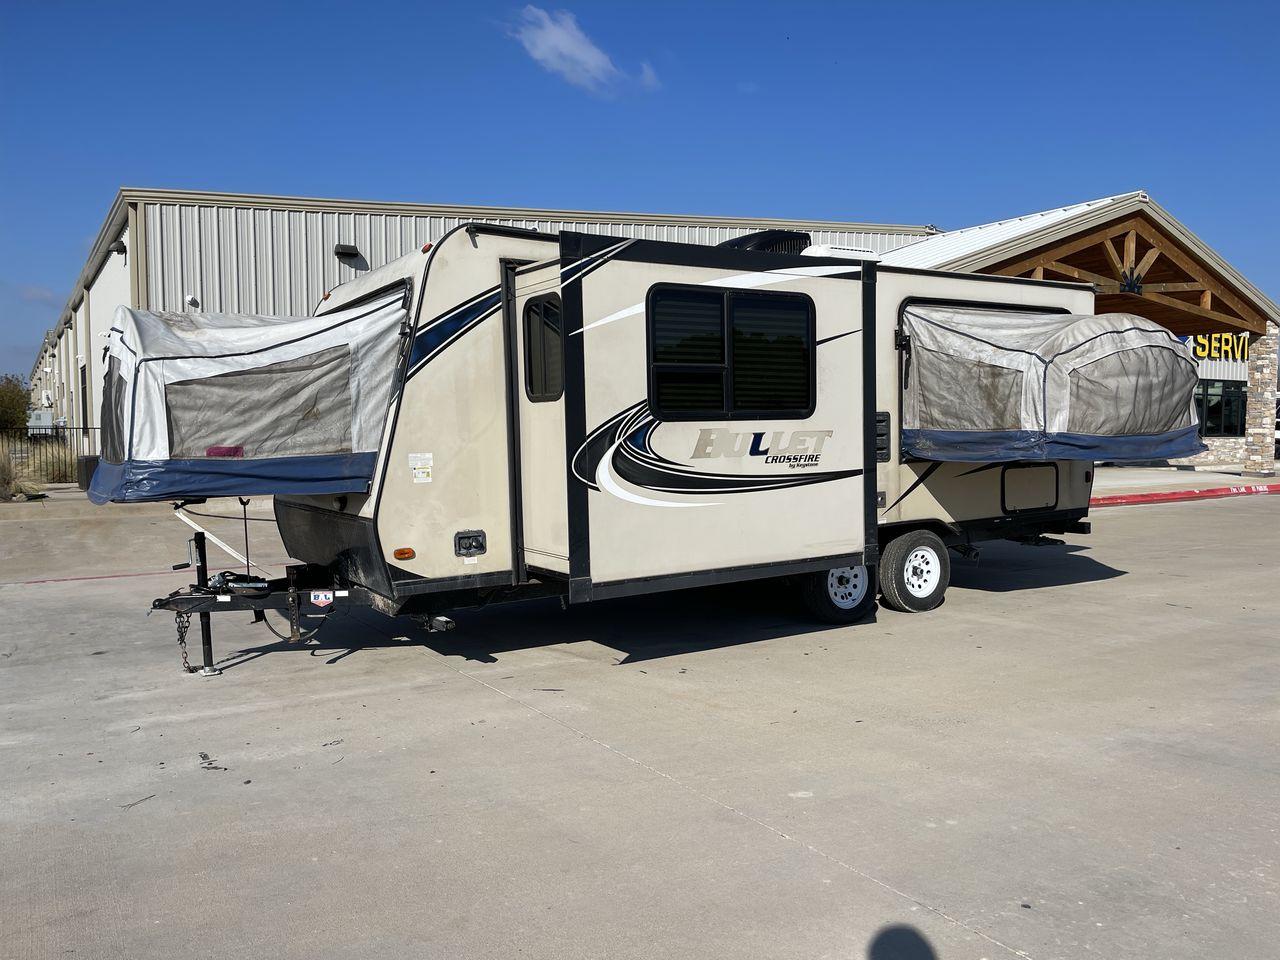 2018 BULLET CROSSFIRE 2190EX (4YDT21923JT) , Length: 25.08 ft. | Dry Weight: 4,410 lbs. | Gross Weight: 6,300 lbs. | Slides: 1 transmission, located at 4319 N Main Street, Cleburne, TX, 76033, (817) 221-0660, 32.435829, -97.384178 - The 2018 Bullet Crossfire 2190EX is a lightweight vacation trailer that can be used for a variety of activities. This trailer is 25.08 feet long and weighs 4,410 pounds dry. It is easy to pull and move, which makes it great for both short trips and longer vacations. Even though it's small, the Cross - Photo #24